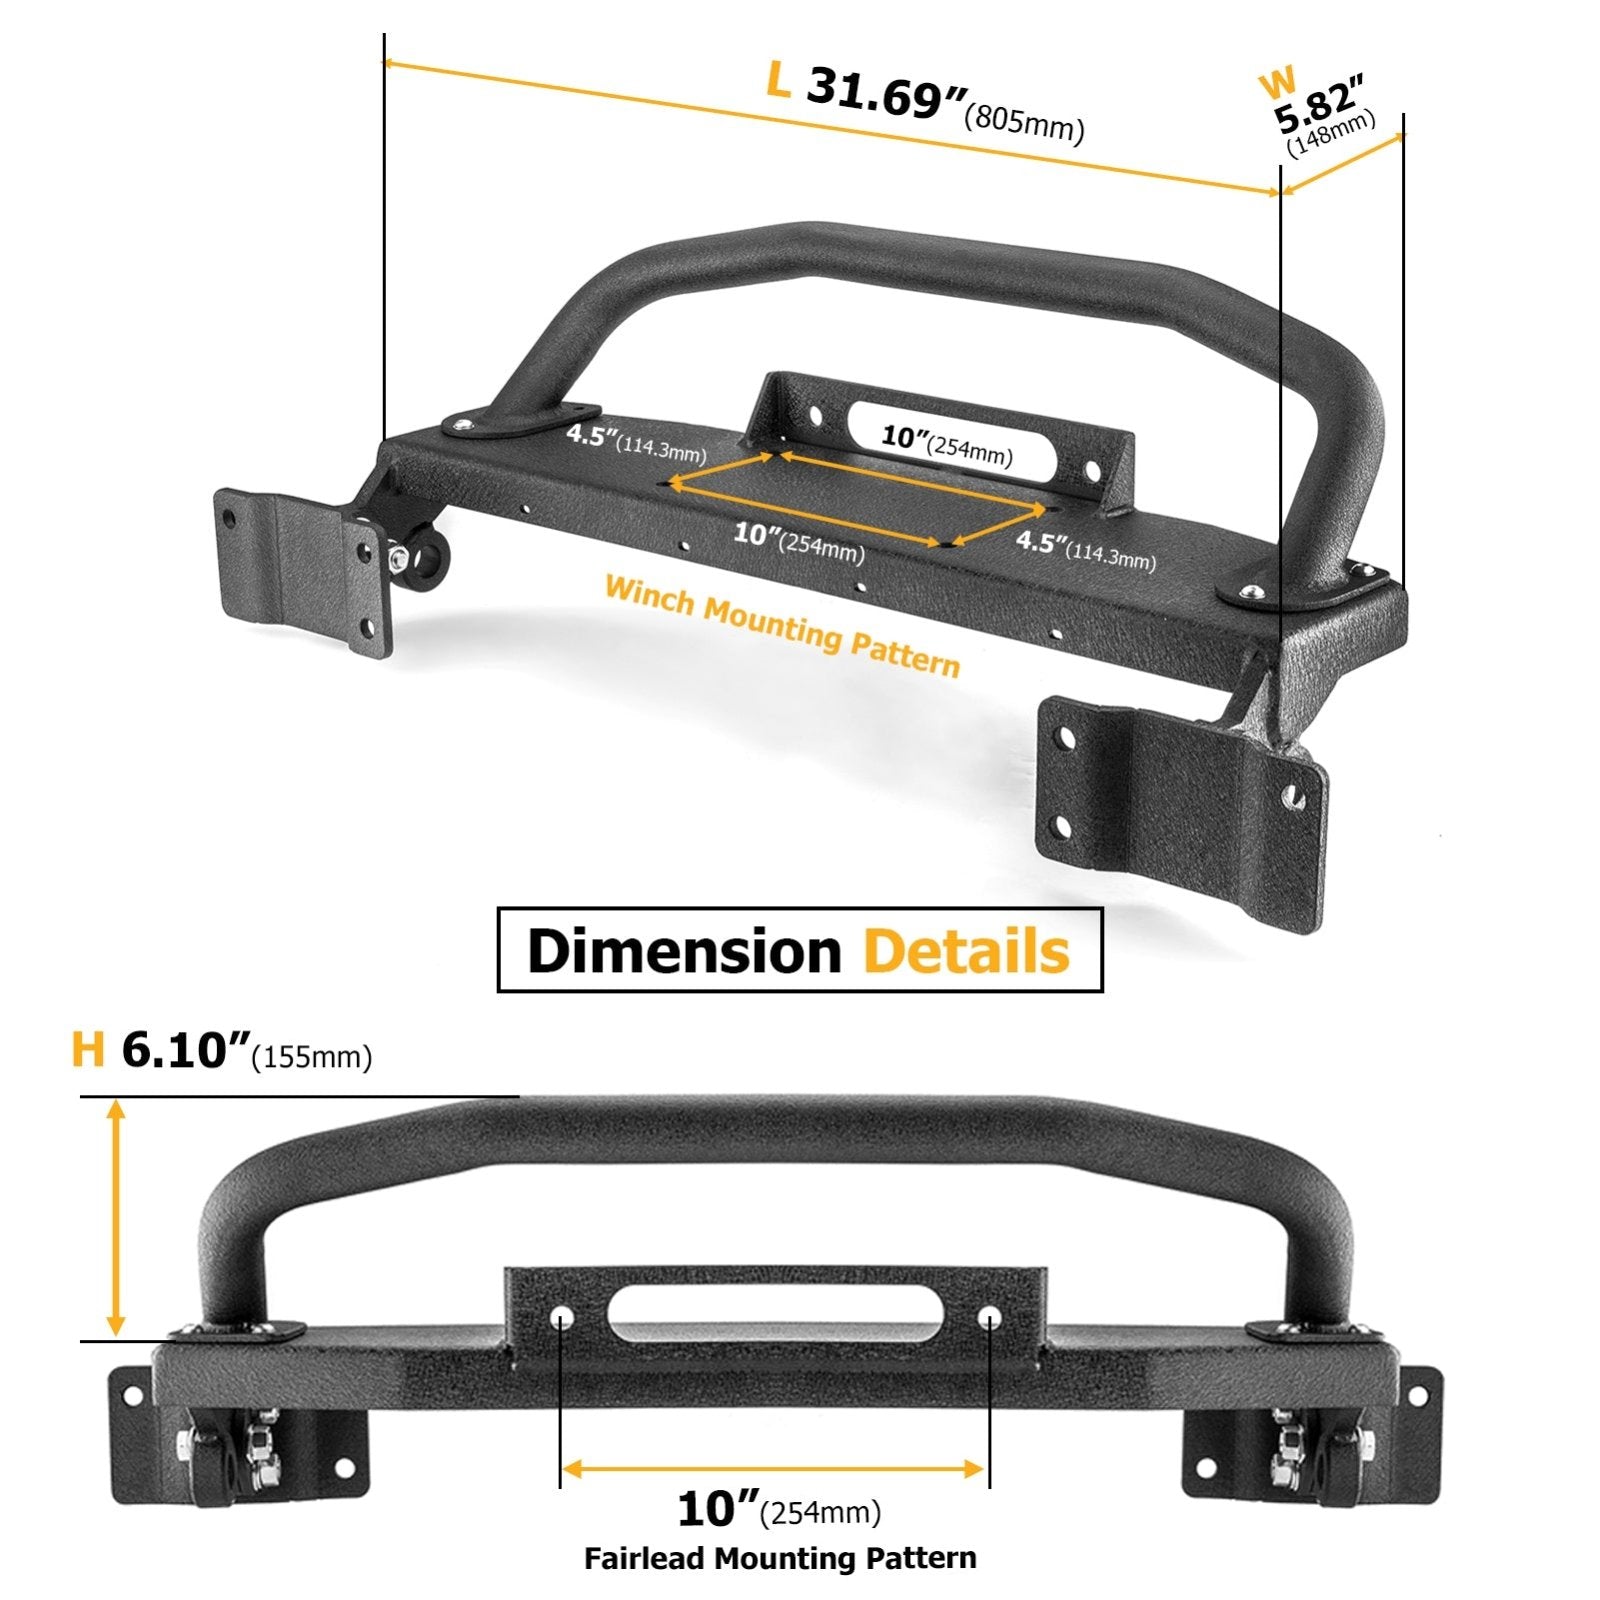 2021-2023 Ford Bronco Steel Front Bumper Bull Bar with Winch Frame & D-rings Bracket - Weisen